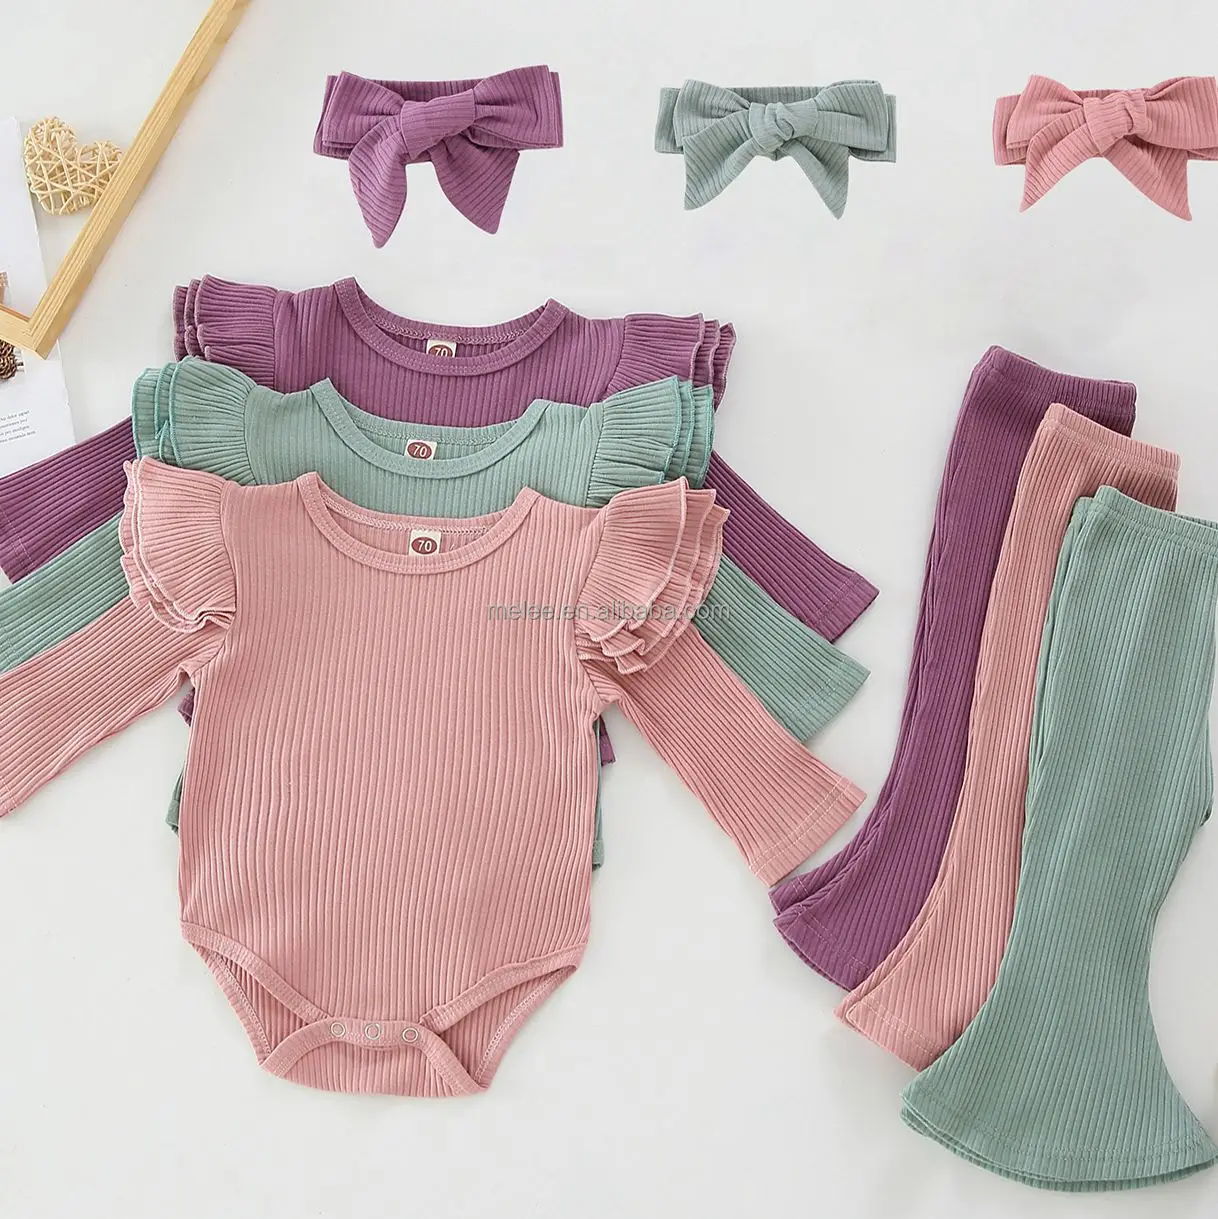 

Y108038 Autumn ribbed cotton boutique clothing outfit flutter sleeve baby rompers girls kids flared pants 3 pieces sets